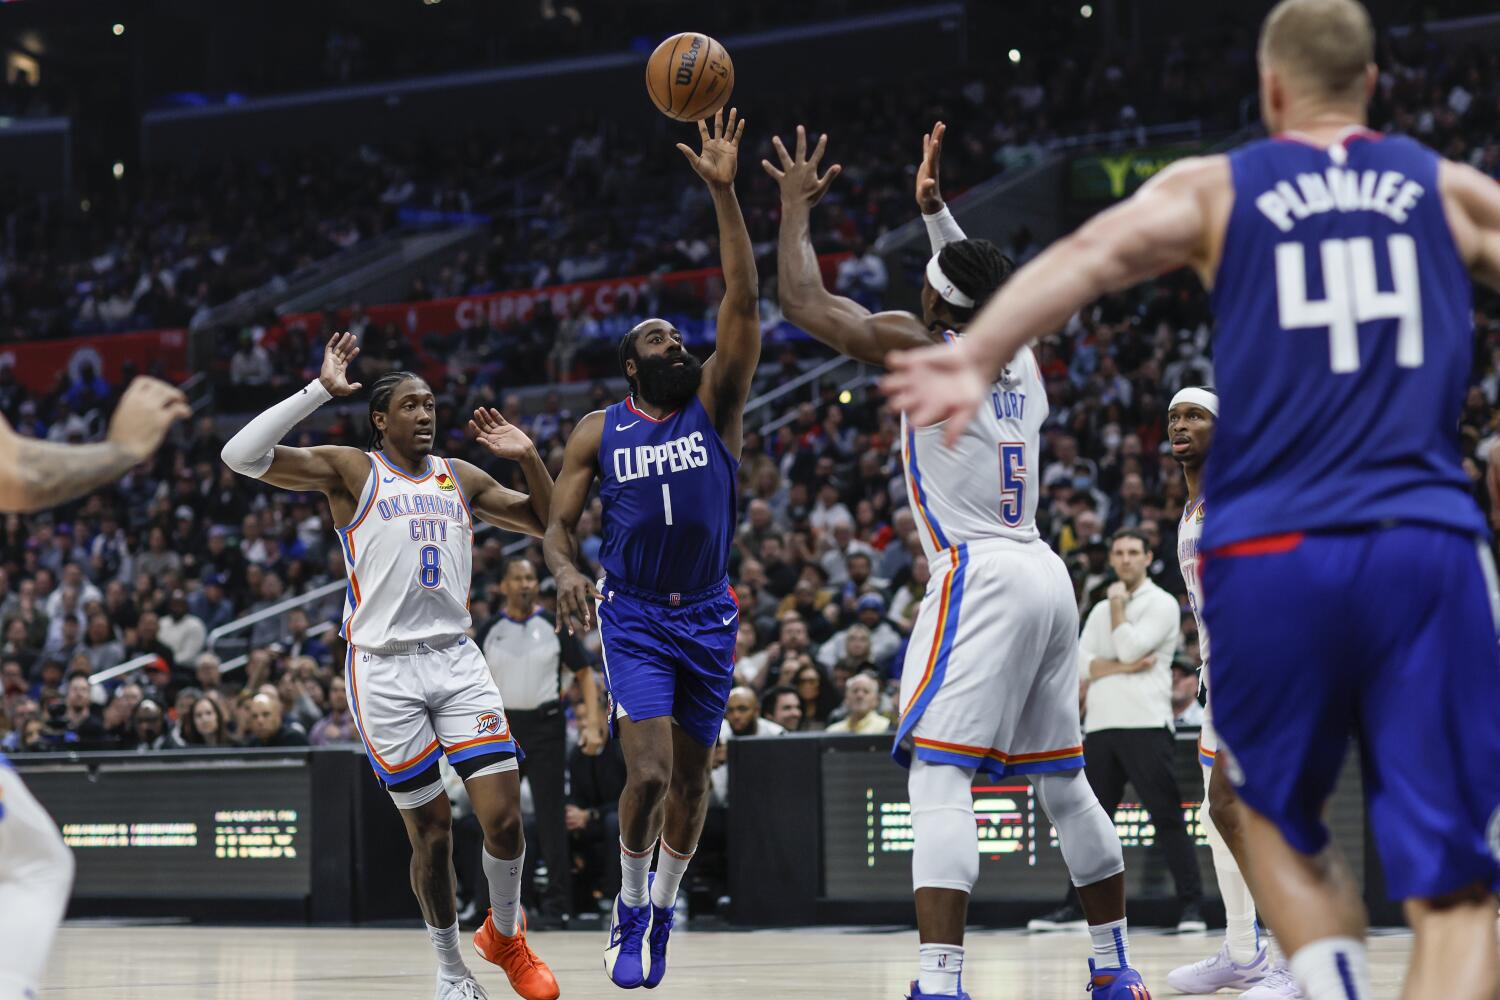 James Harden wants Clippers core to stay intact. 'Things are going well and I'm happy'